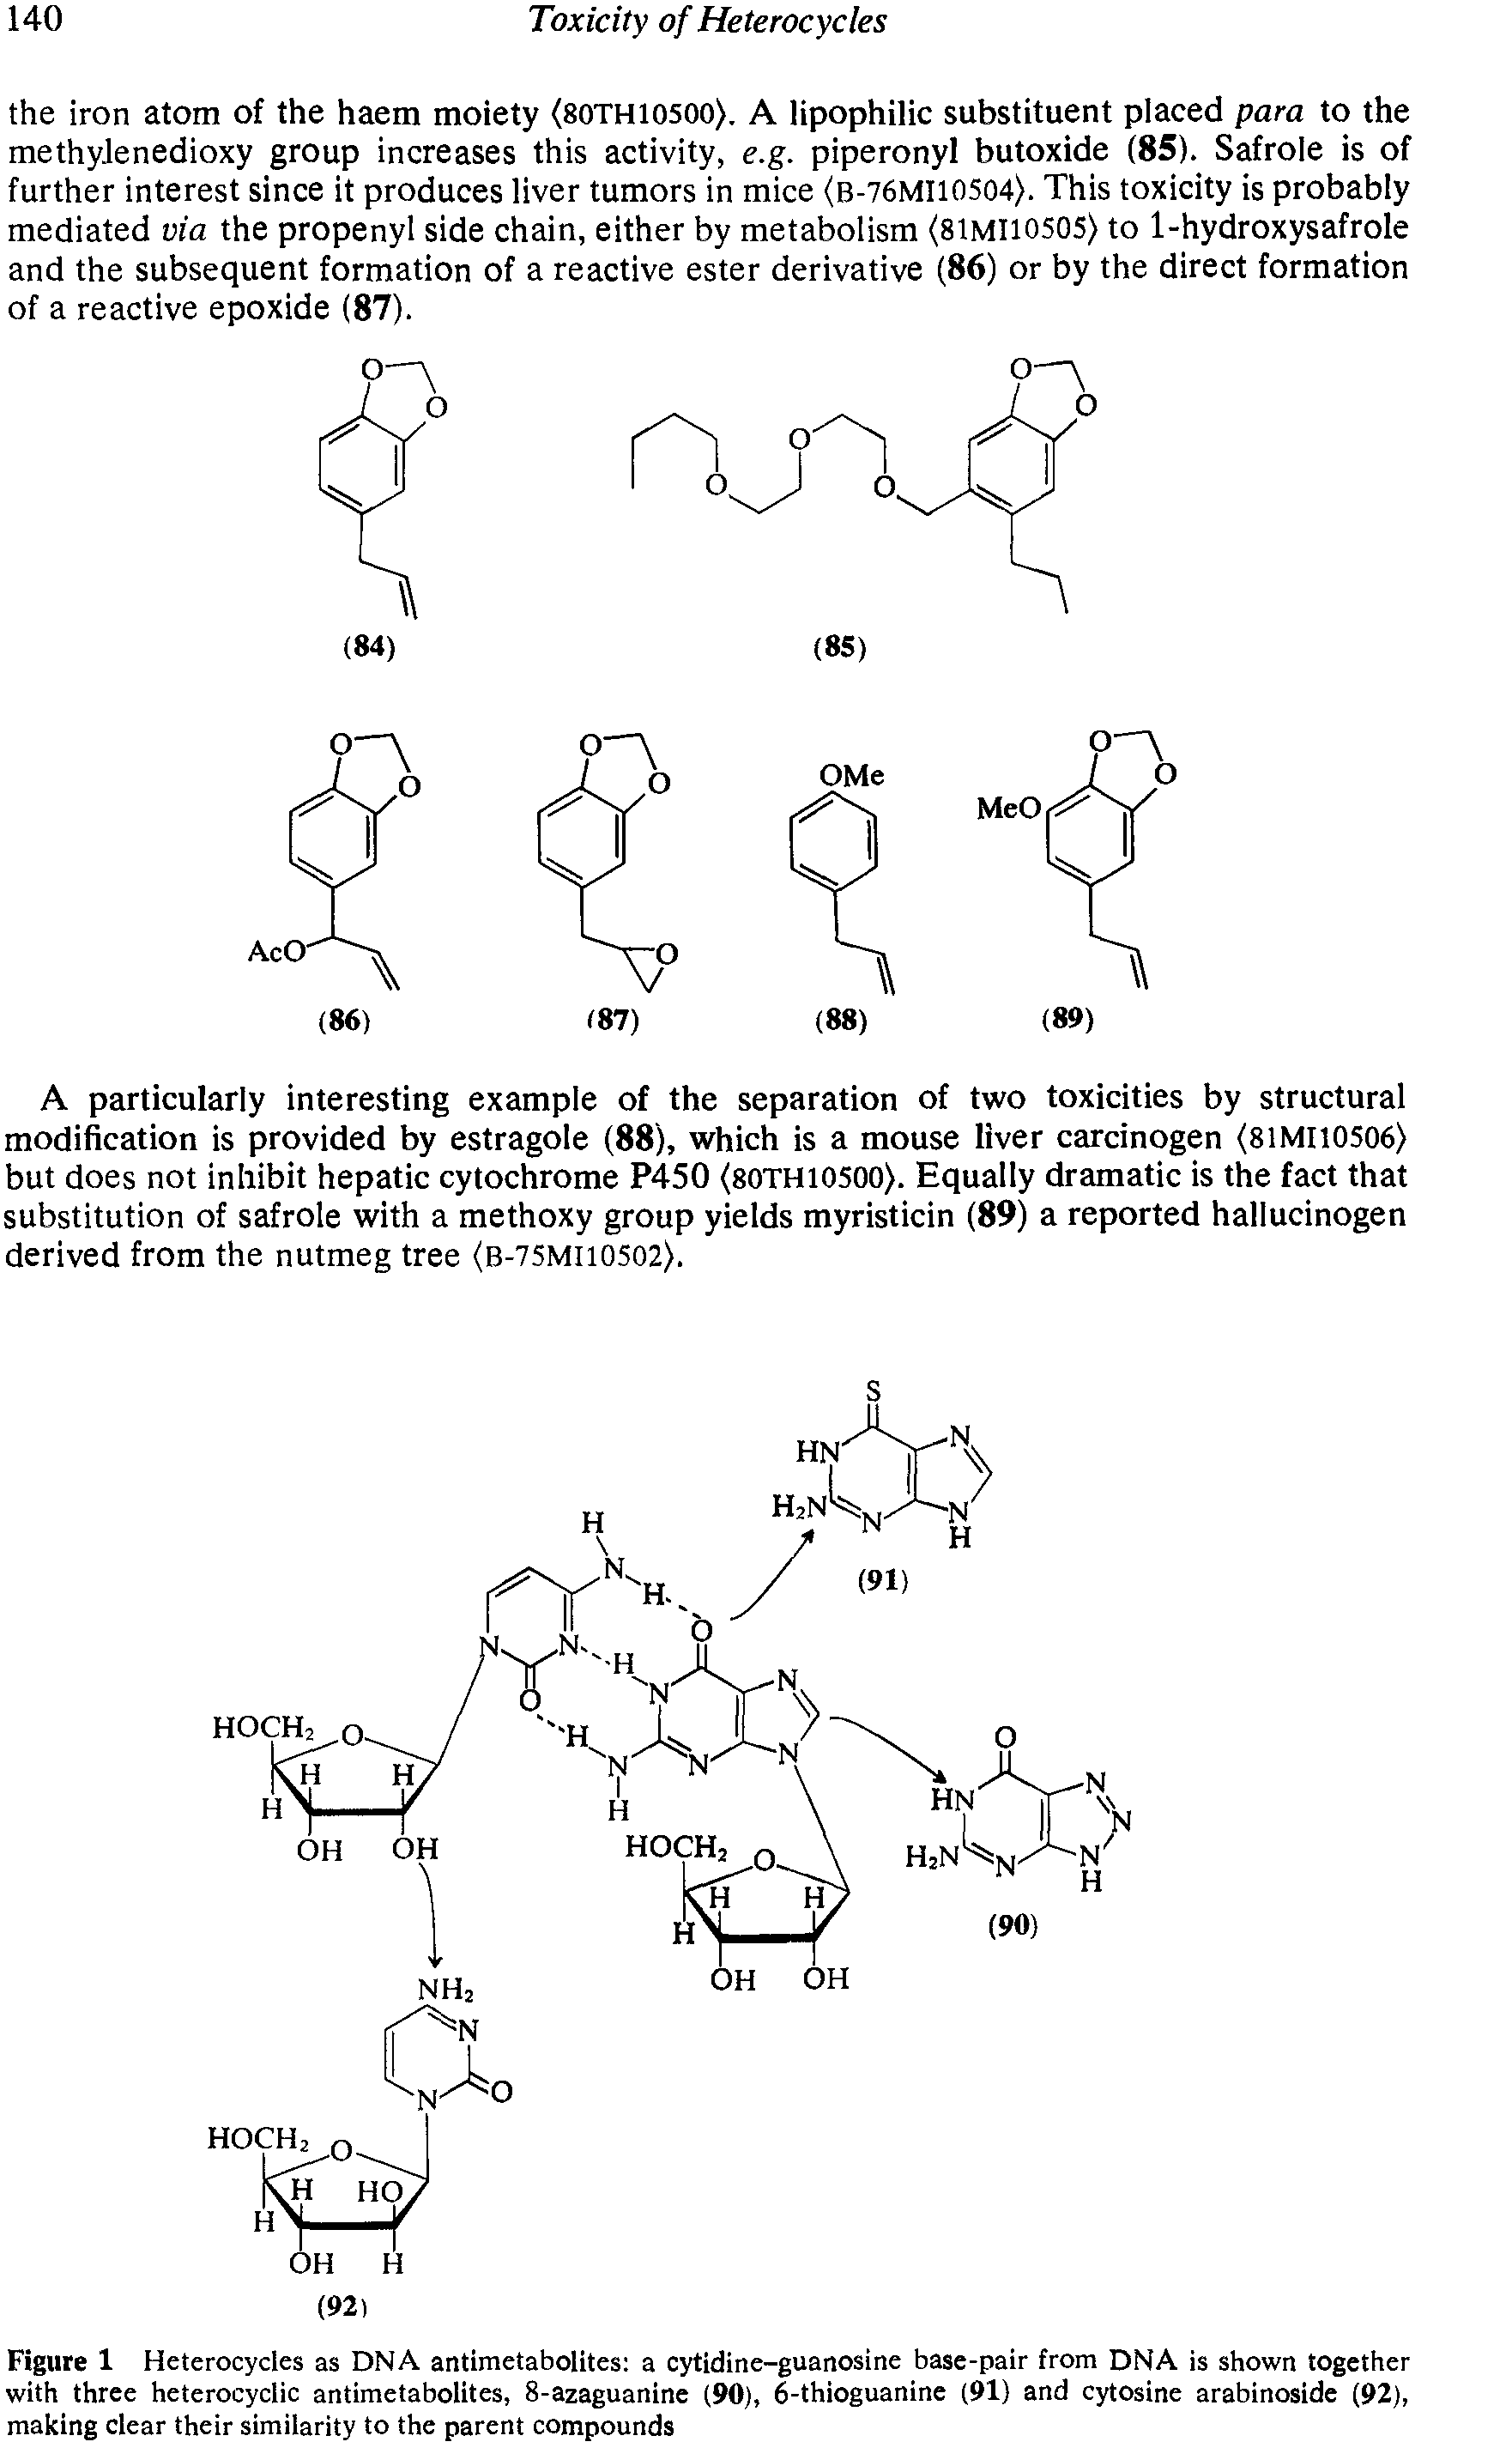 Figure 1 Heterocycles as DNA antimetabolites a cytidine-guanosine base-pair from DNA is shown together with three heterocyclic antimetabolites, 8-azaguanine (90), 6-thioguanine (91) and cytosine arabinoside (92), making clear their similarity to the parent compounds...